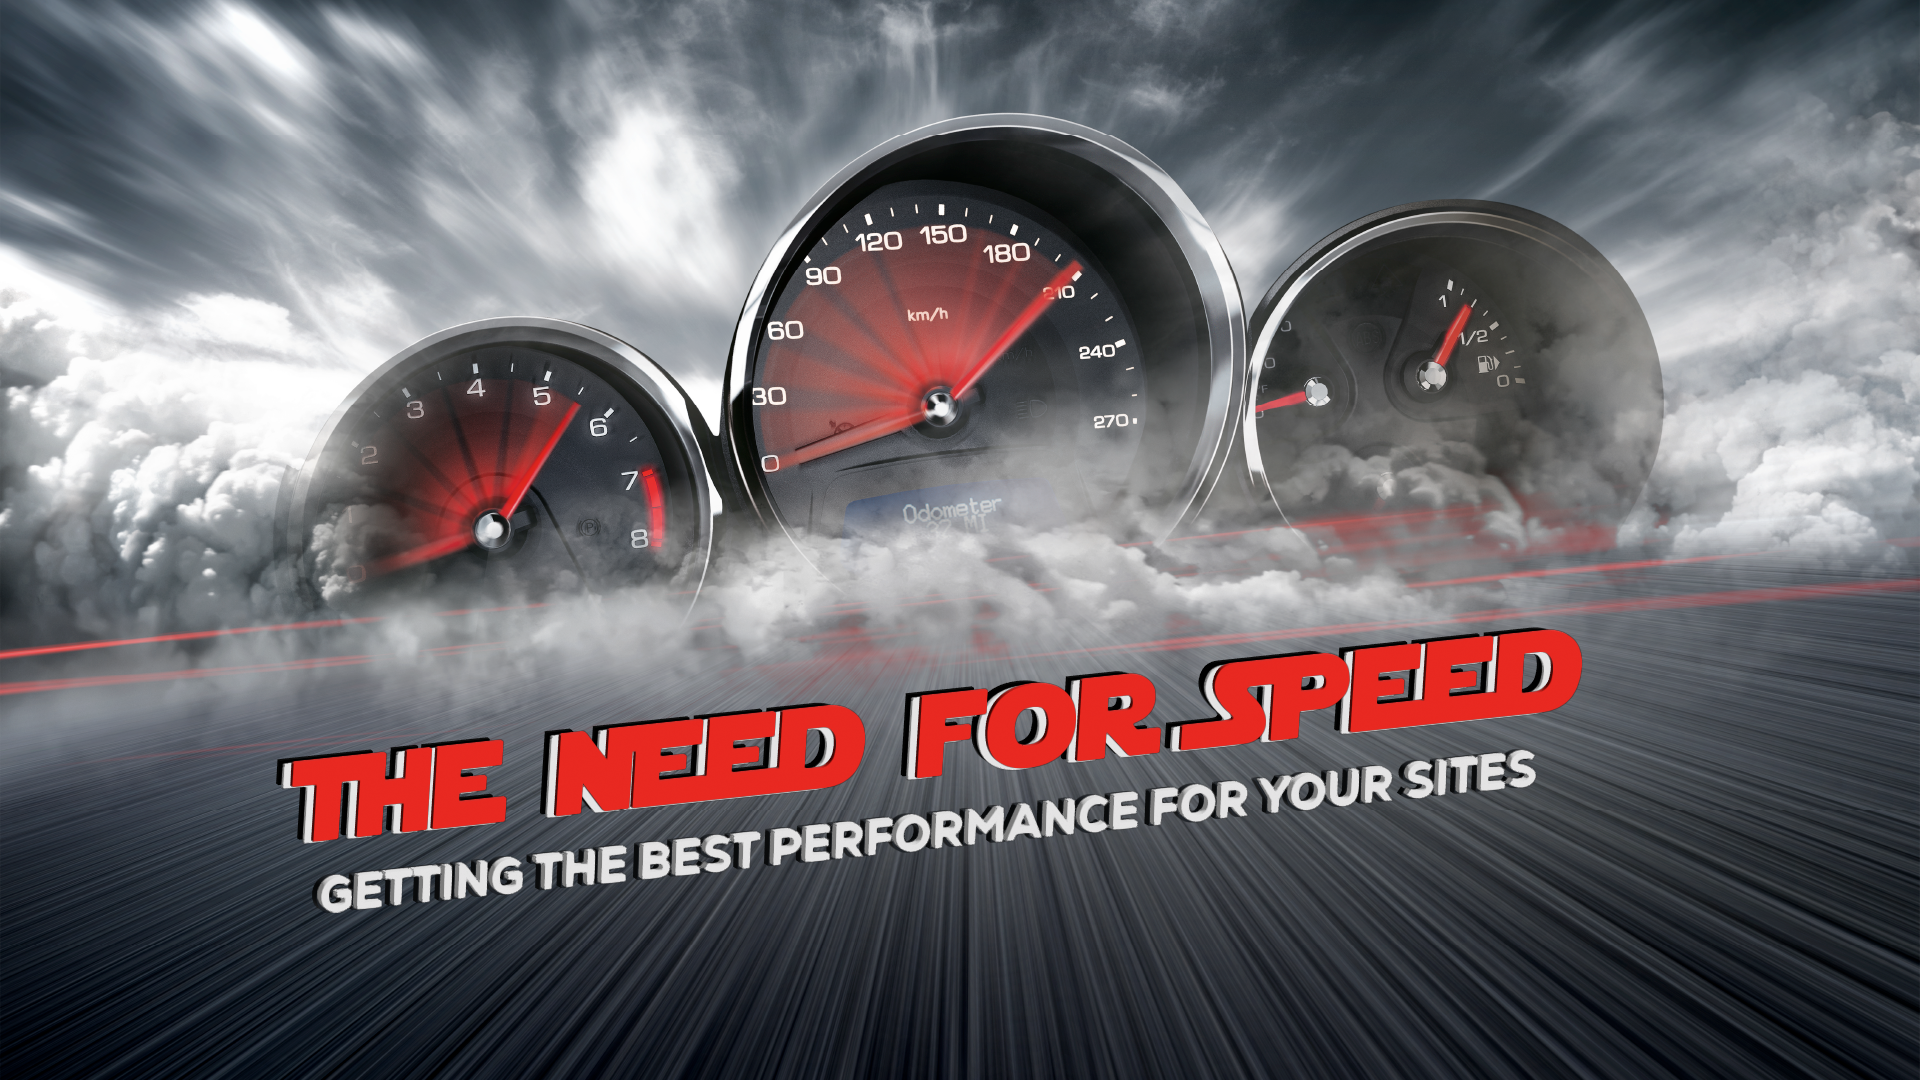 The Need for Speed: Getting the Best Performance for Your Sites